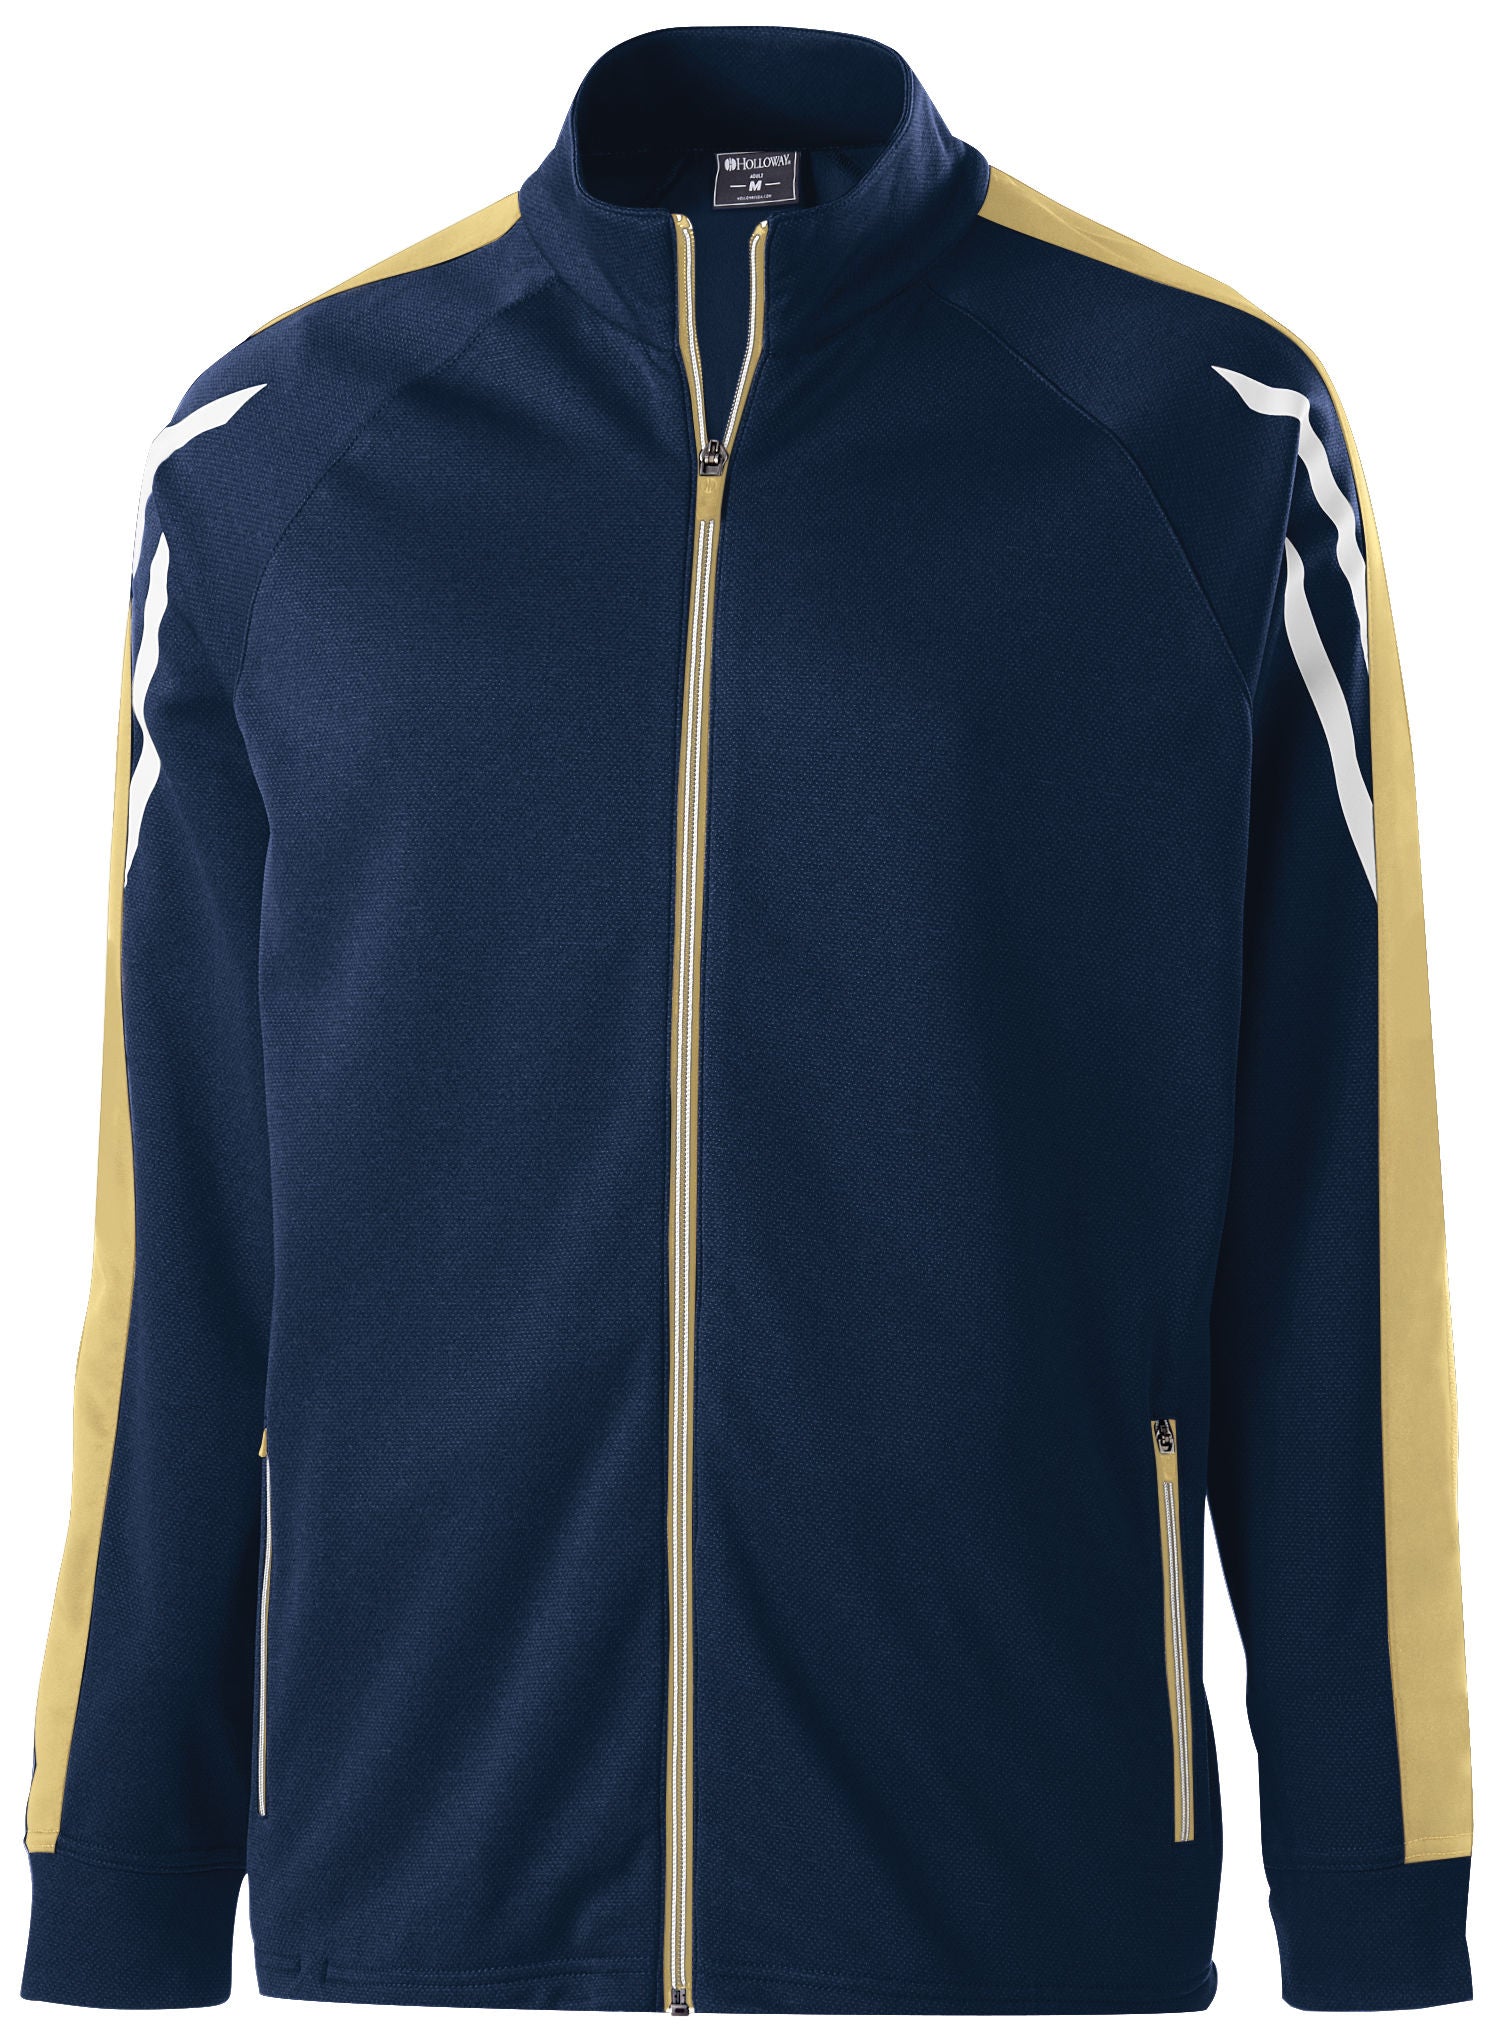 Holloway Flux Jacket in Navy Heather/Vegas Gold/White  -Part of the Adult, Adult-Jacket, Holloway, Outerwear, Flux-Collection, Corporate-Collection product lines at KanaleyCreations.com